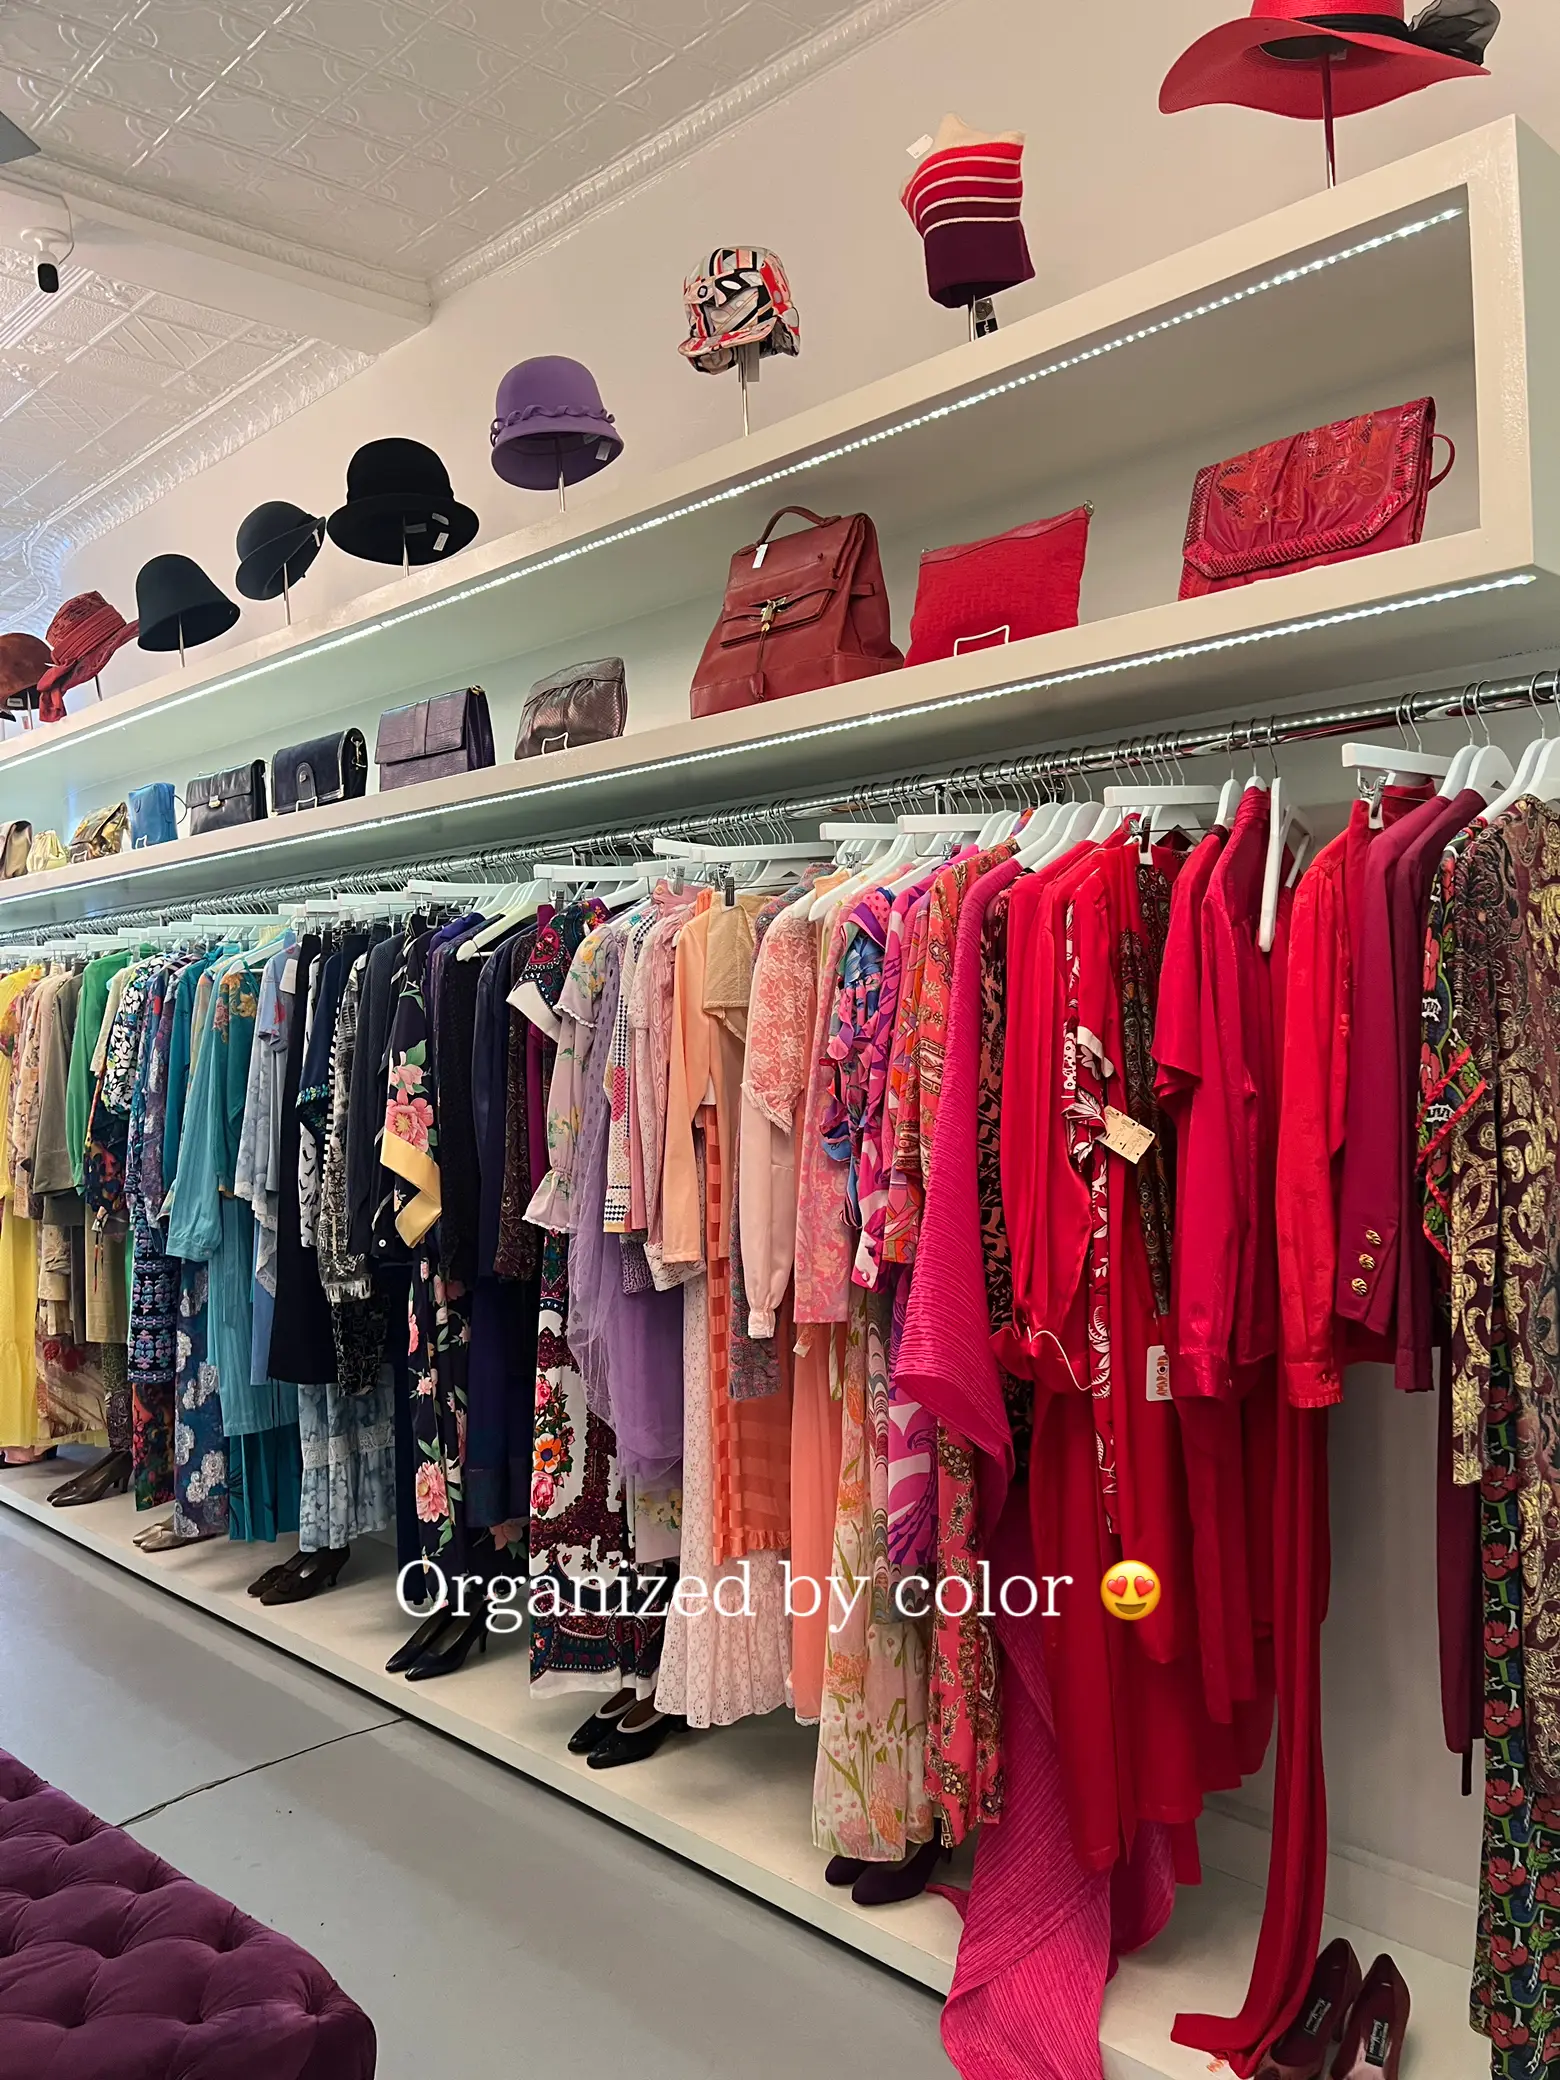 New: Thrifty Finds Meet Boutique Vibes at Emily's Closet - Step Out Buffalo